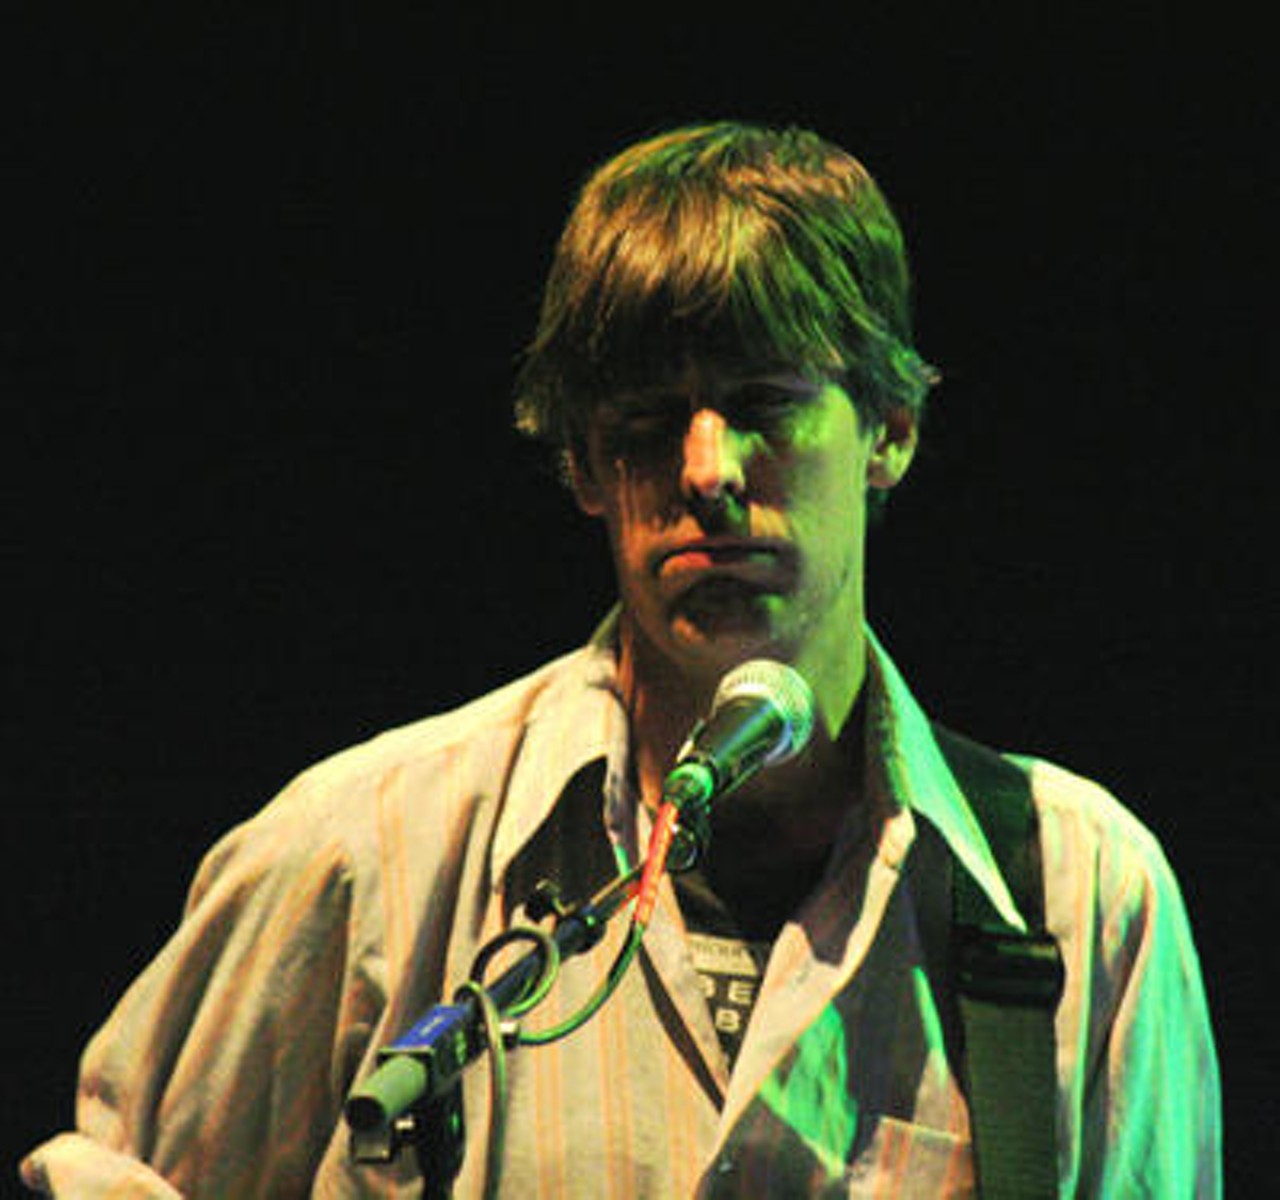 Aww don't be sad. Stephen Malkmus and the Jicks performed on November 1 at the Pageant. See more photos from the concert